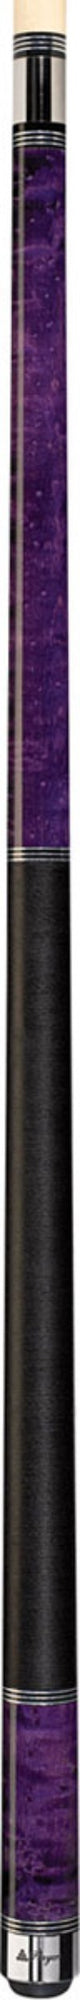 Players Players C-965 Pool Cue Pool Cue